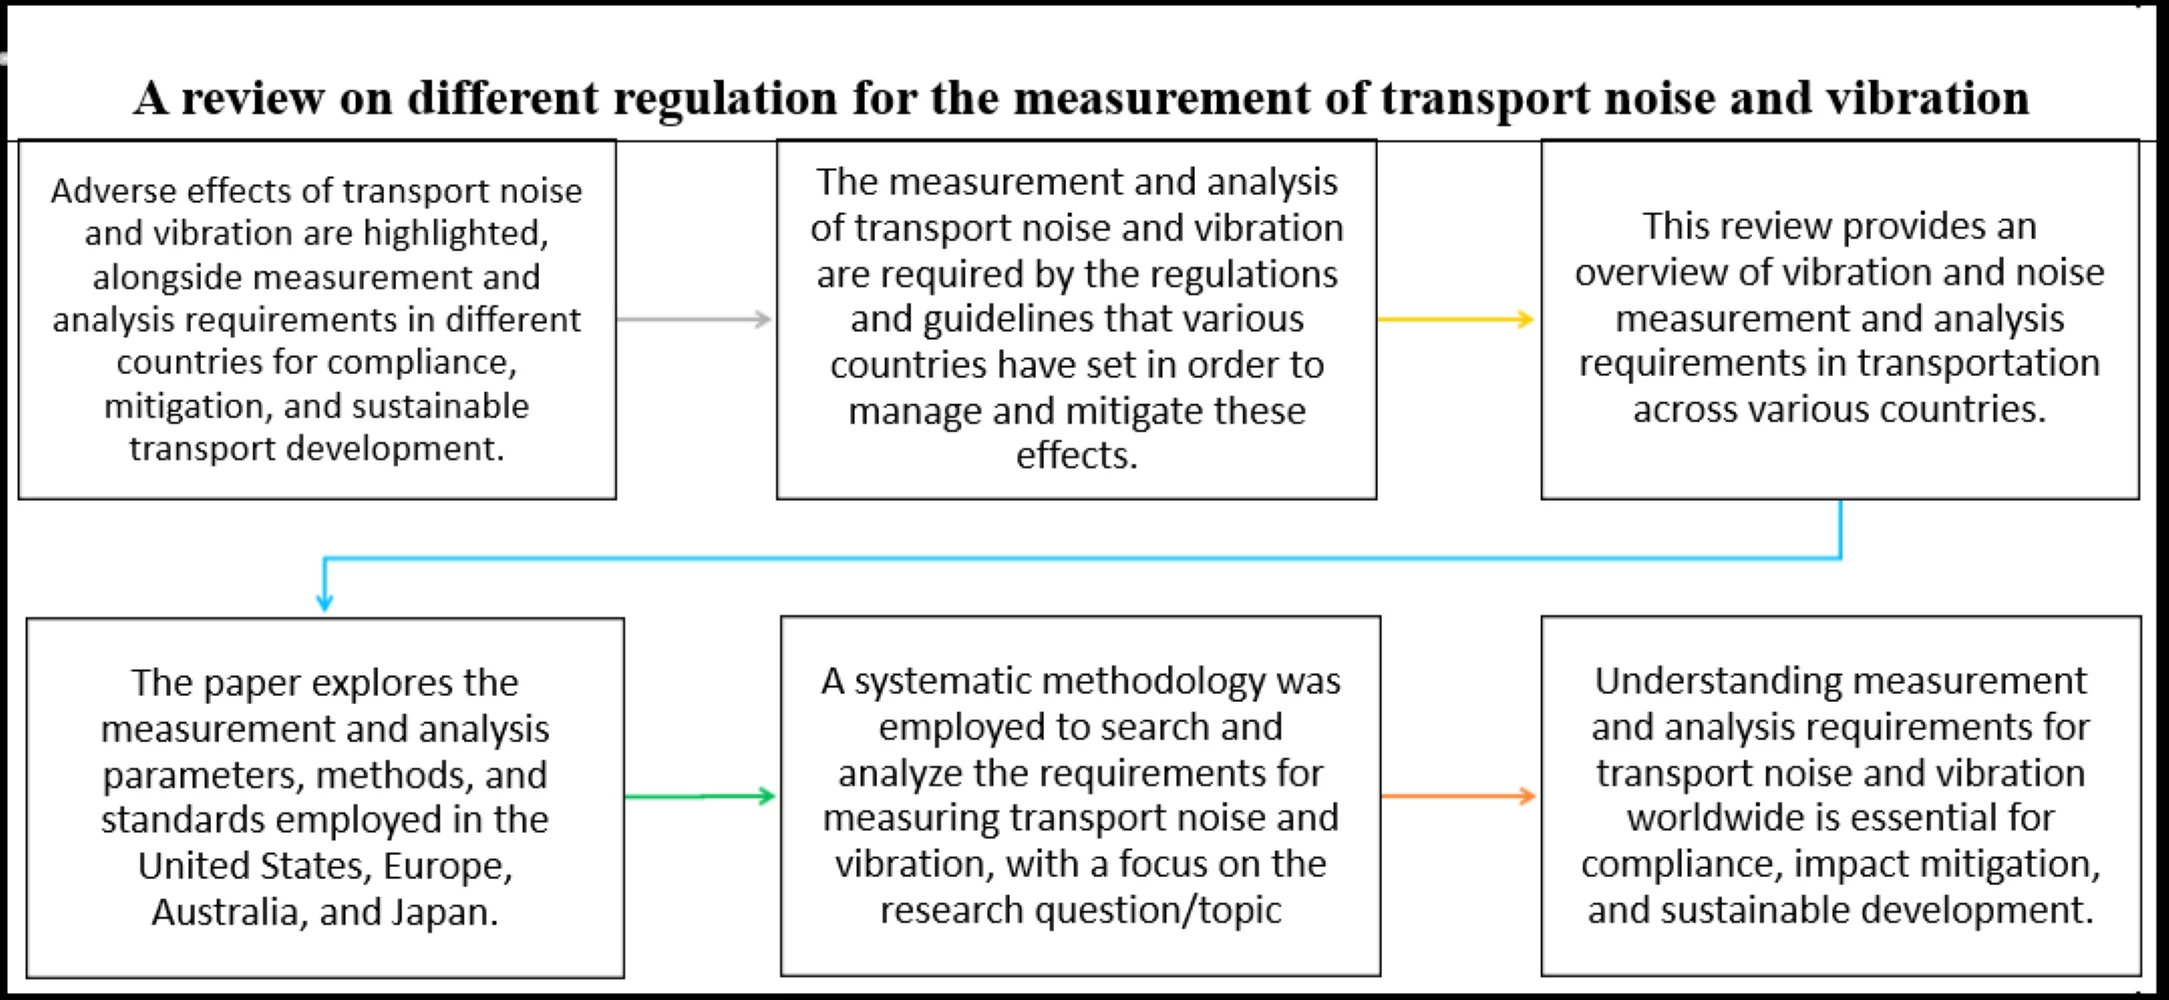 A review on different regulation for the measurement of transport noise and vibration